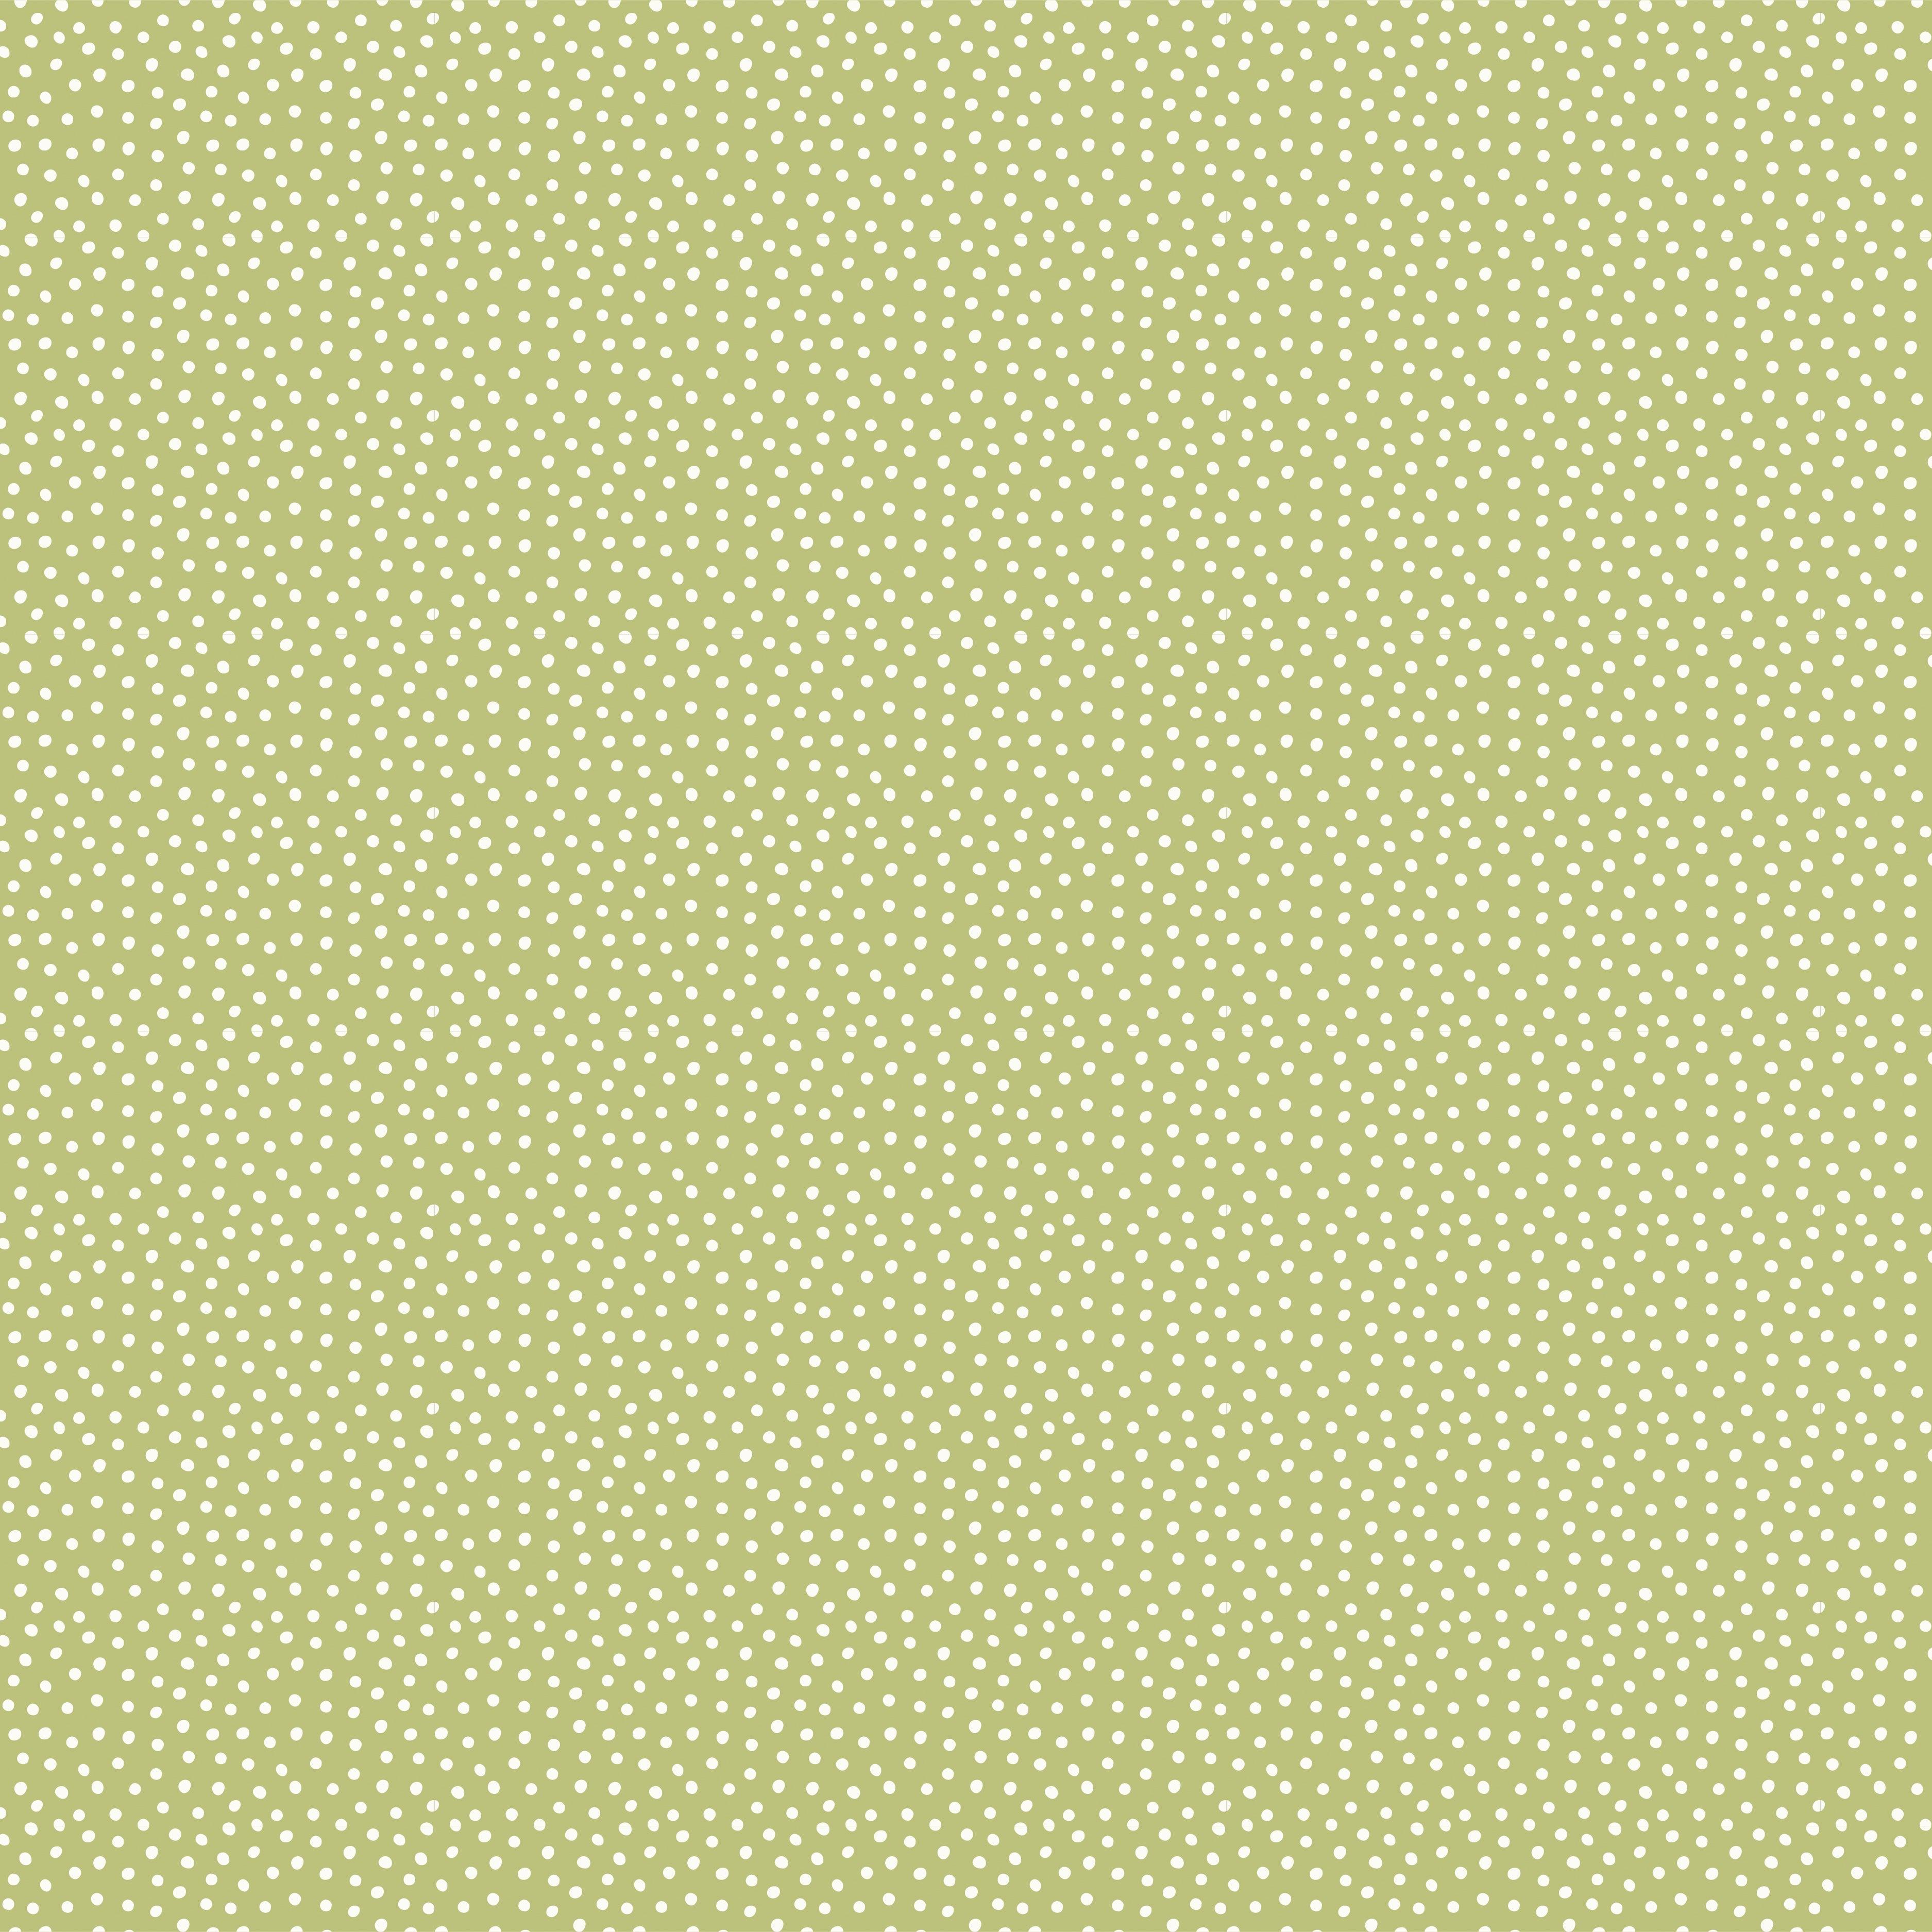 Baking Spirits Bright Collection Season to Sparkle 12 x 12 Double-Sided Scrapbook Paper by Simple Stories - Scrapbook Supply Companies